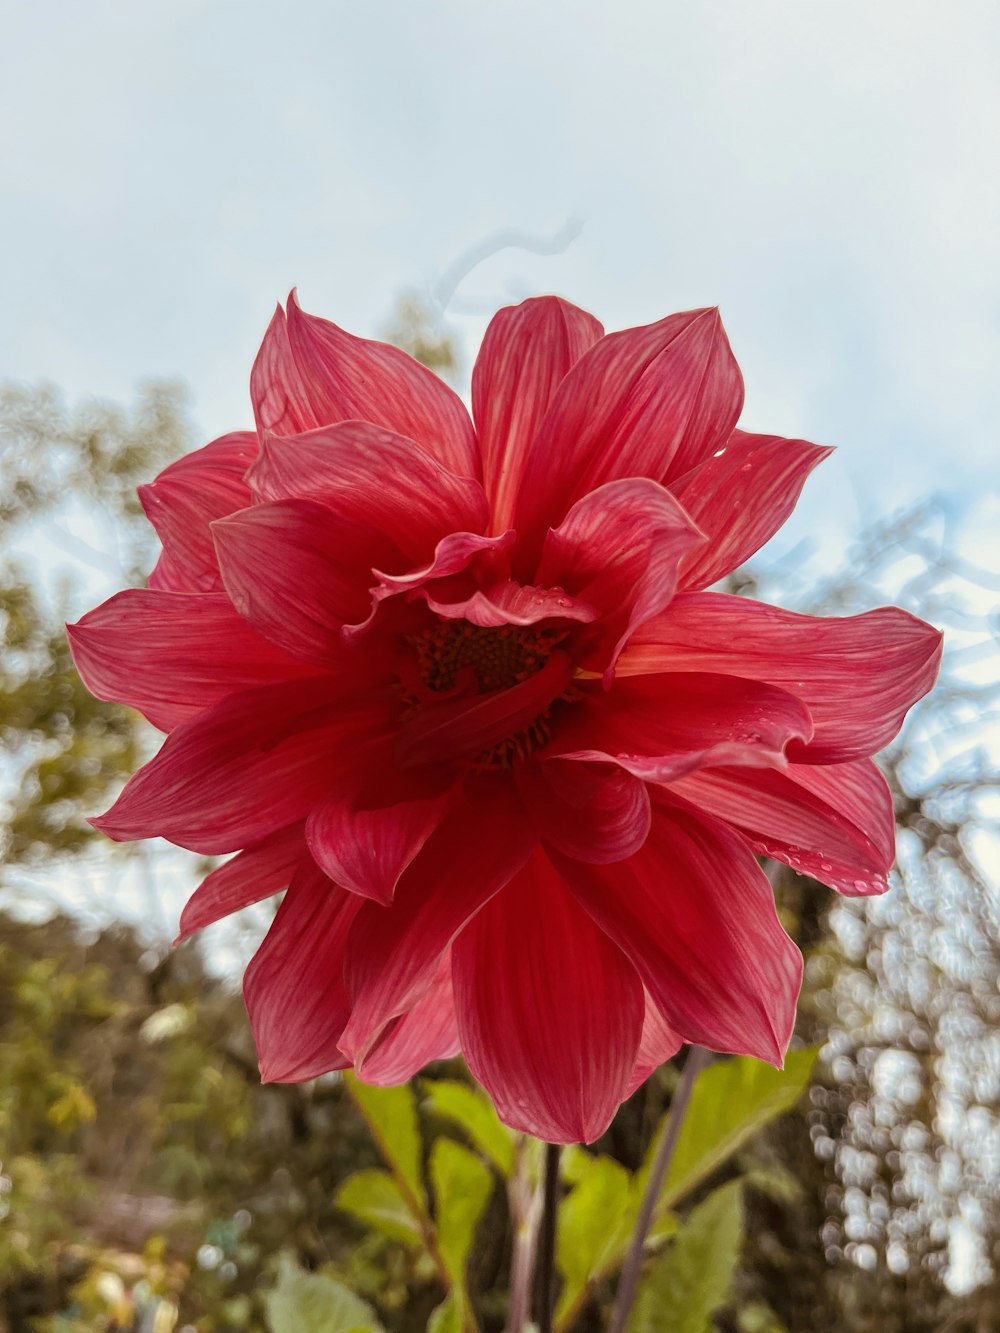 a large red flower with green leaves in the foreground